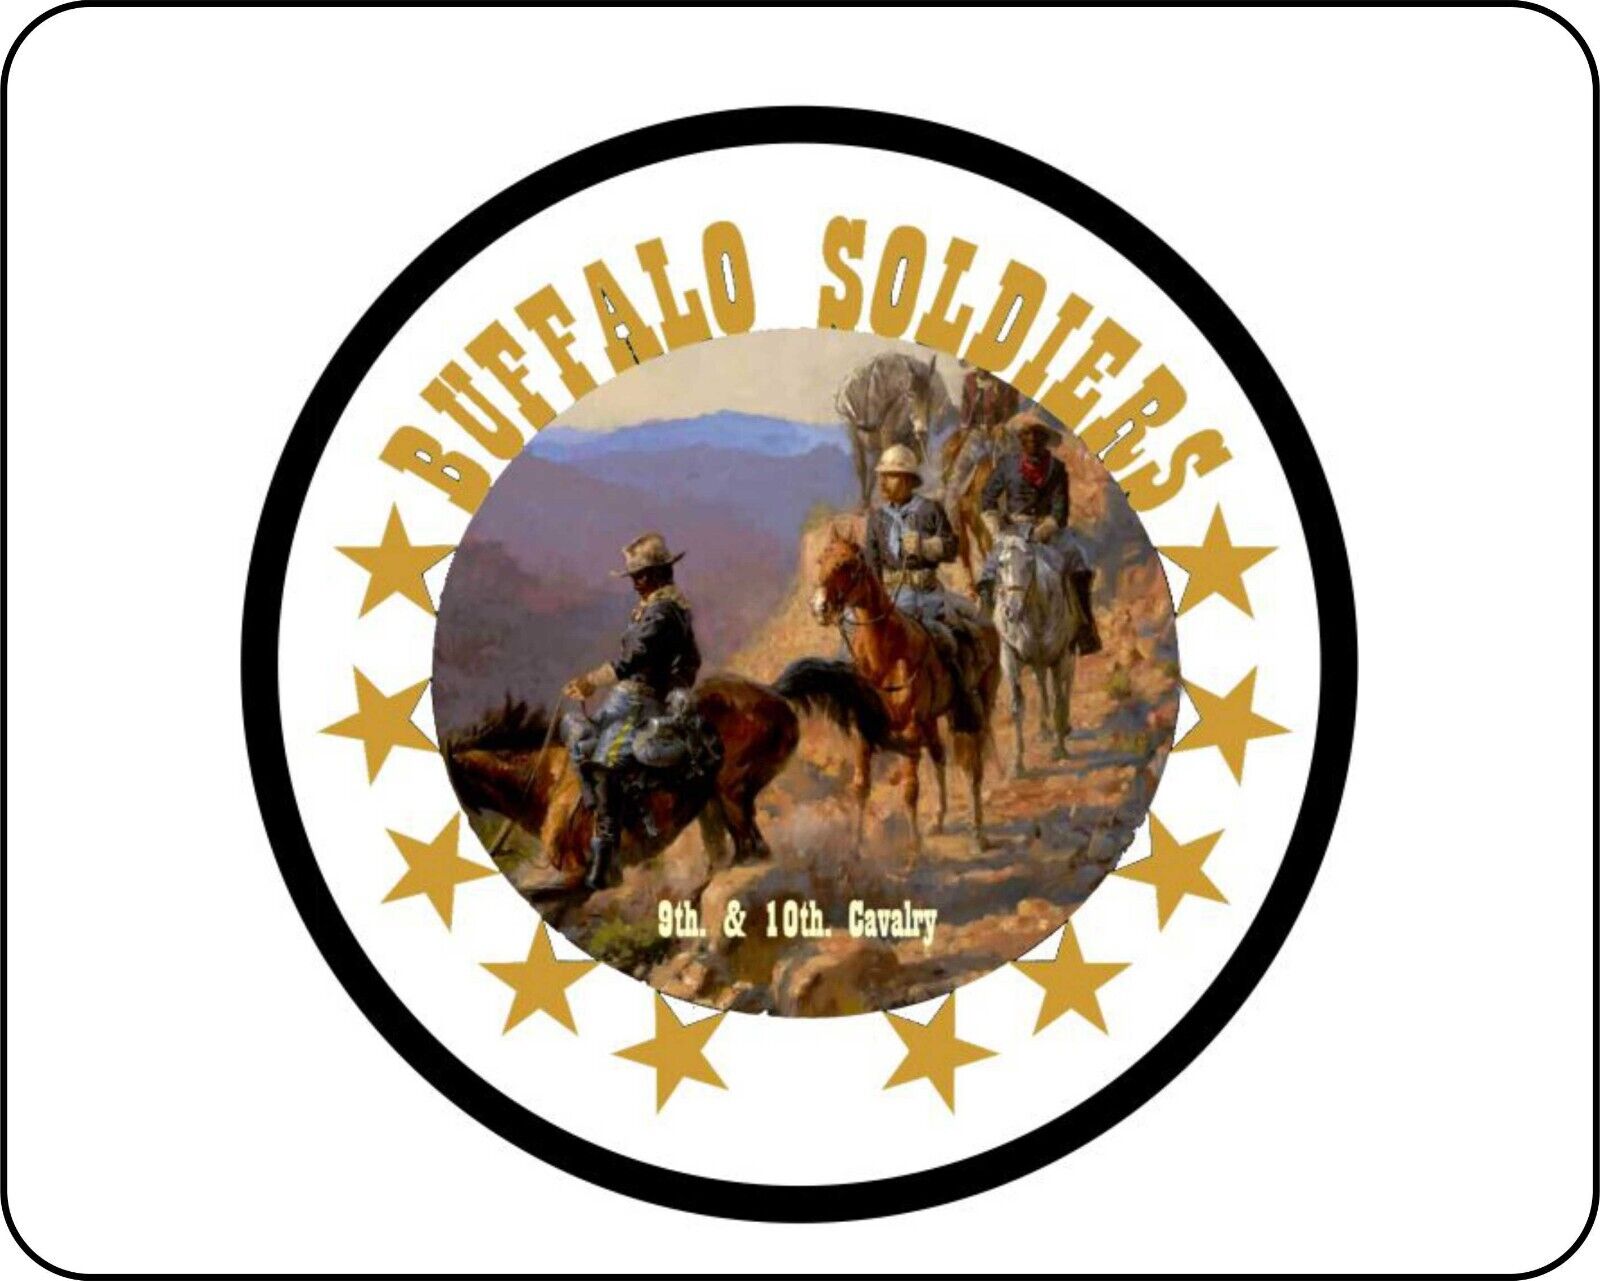 Buffalo Soldiers CivilWar Era  Mouse Pads Mousepads art 9th & 10th Cavalry